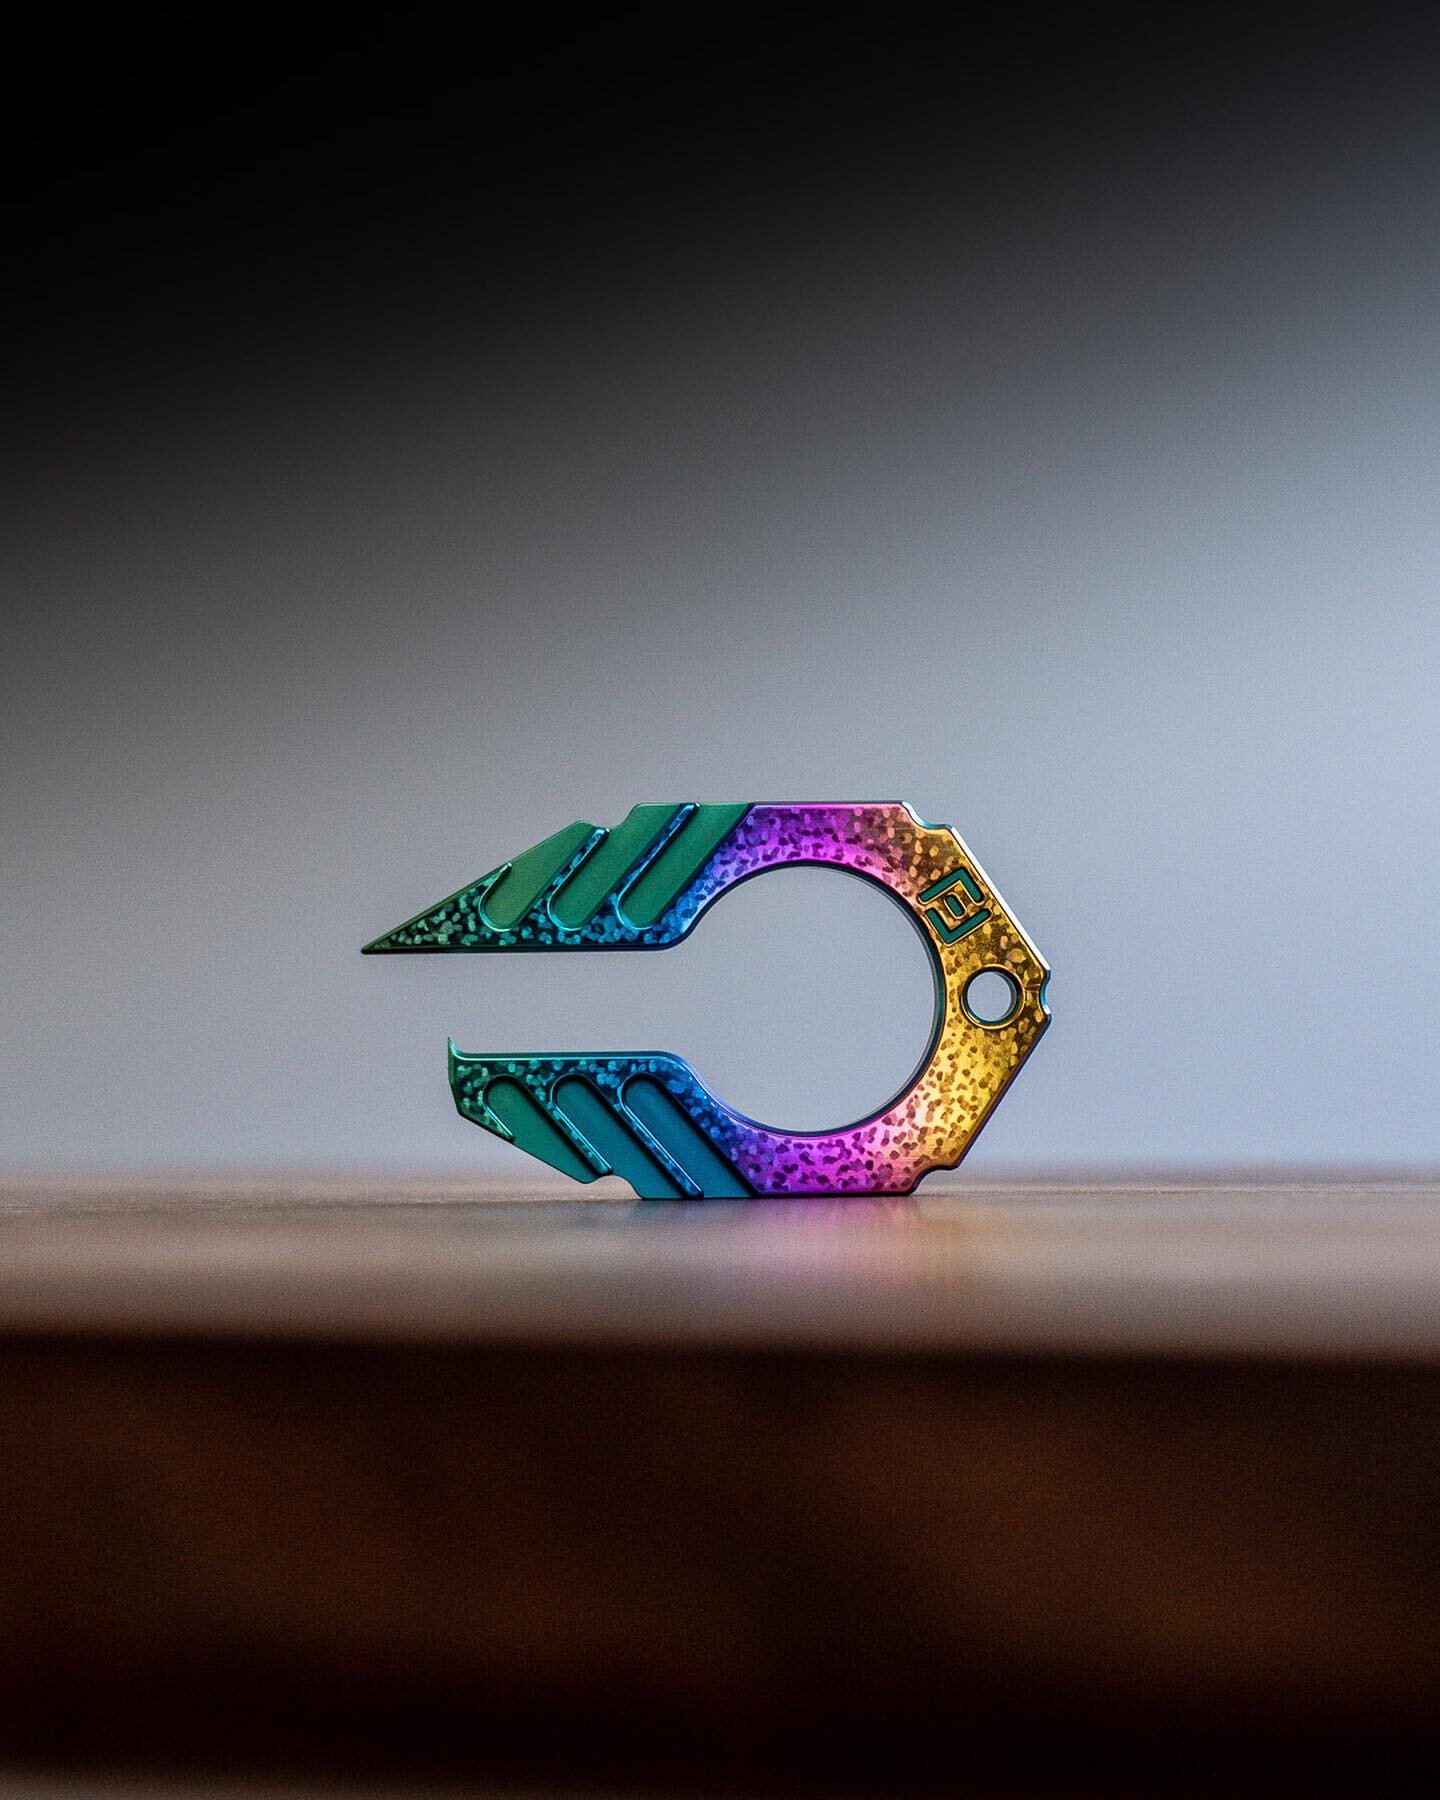 ‼️OFFICIAL AUCTION POST‼️

Up for grabs is this titanium rainbow beauty jeweled up by @bearbonessaltycrew 

This is the last one of the 3 collab pieces!

‼️PLEASE read ALL the auction rules before bidding:

1. Bidding starts at $150
2. Bids must be i